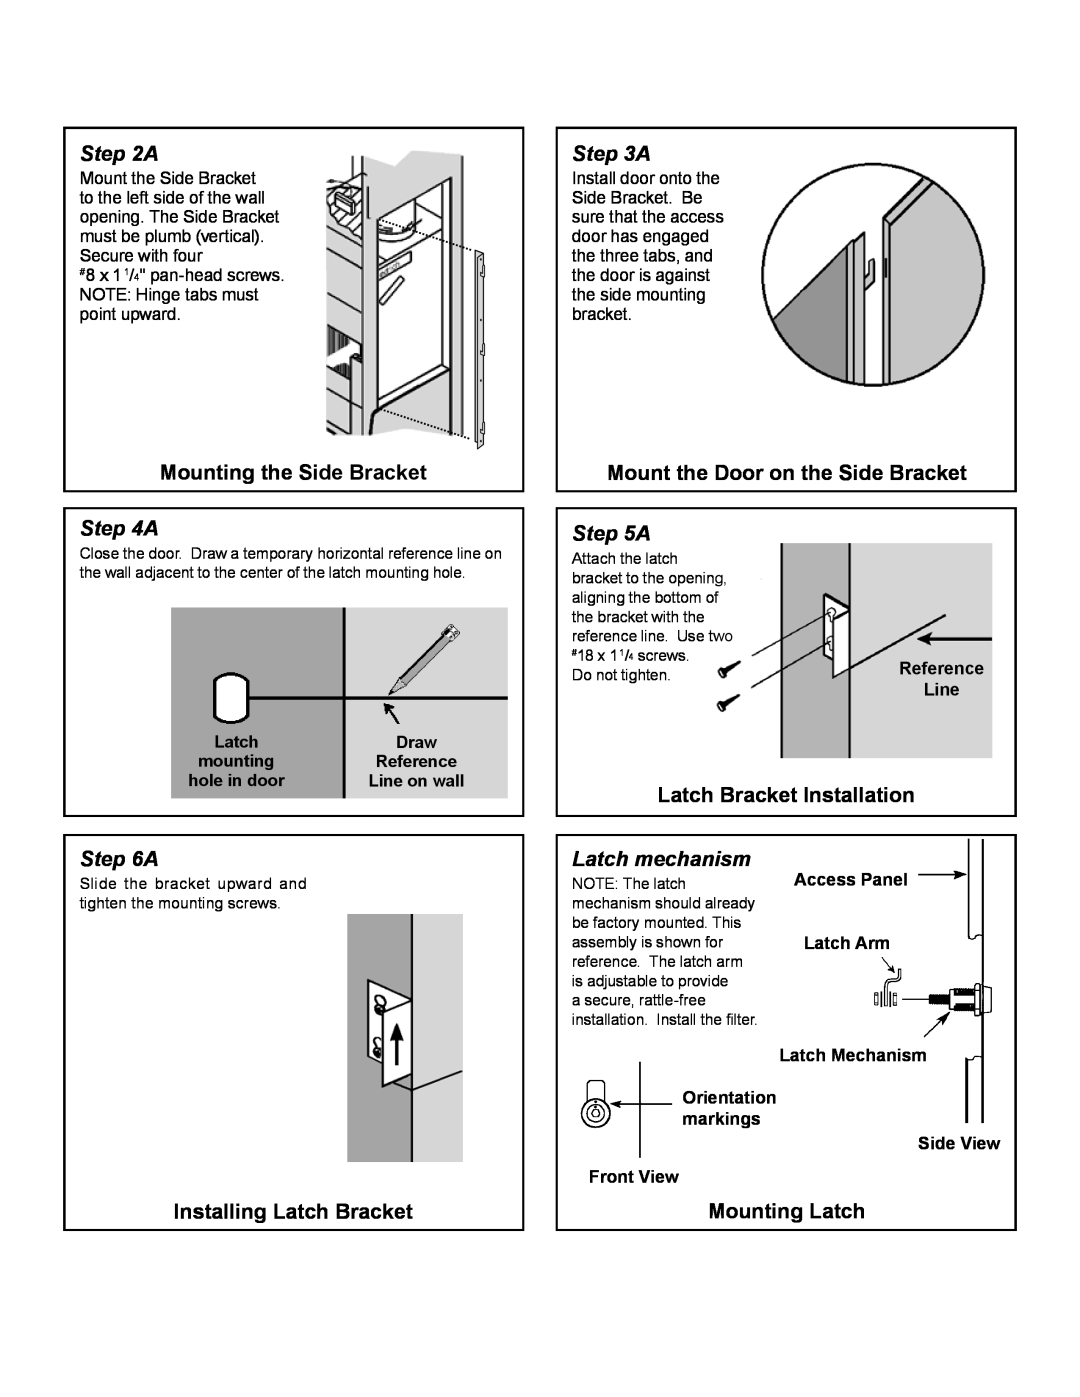 Friedrich VPRG4 A, Mounting the Side Bracket, Mount the Door on the Side Bracket, Latch Bracket Installation, Line 